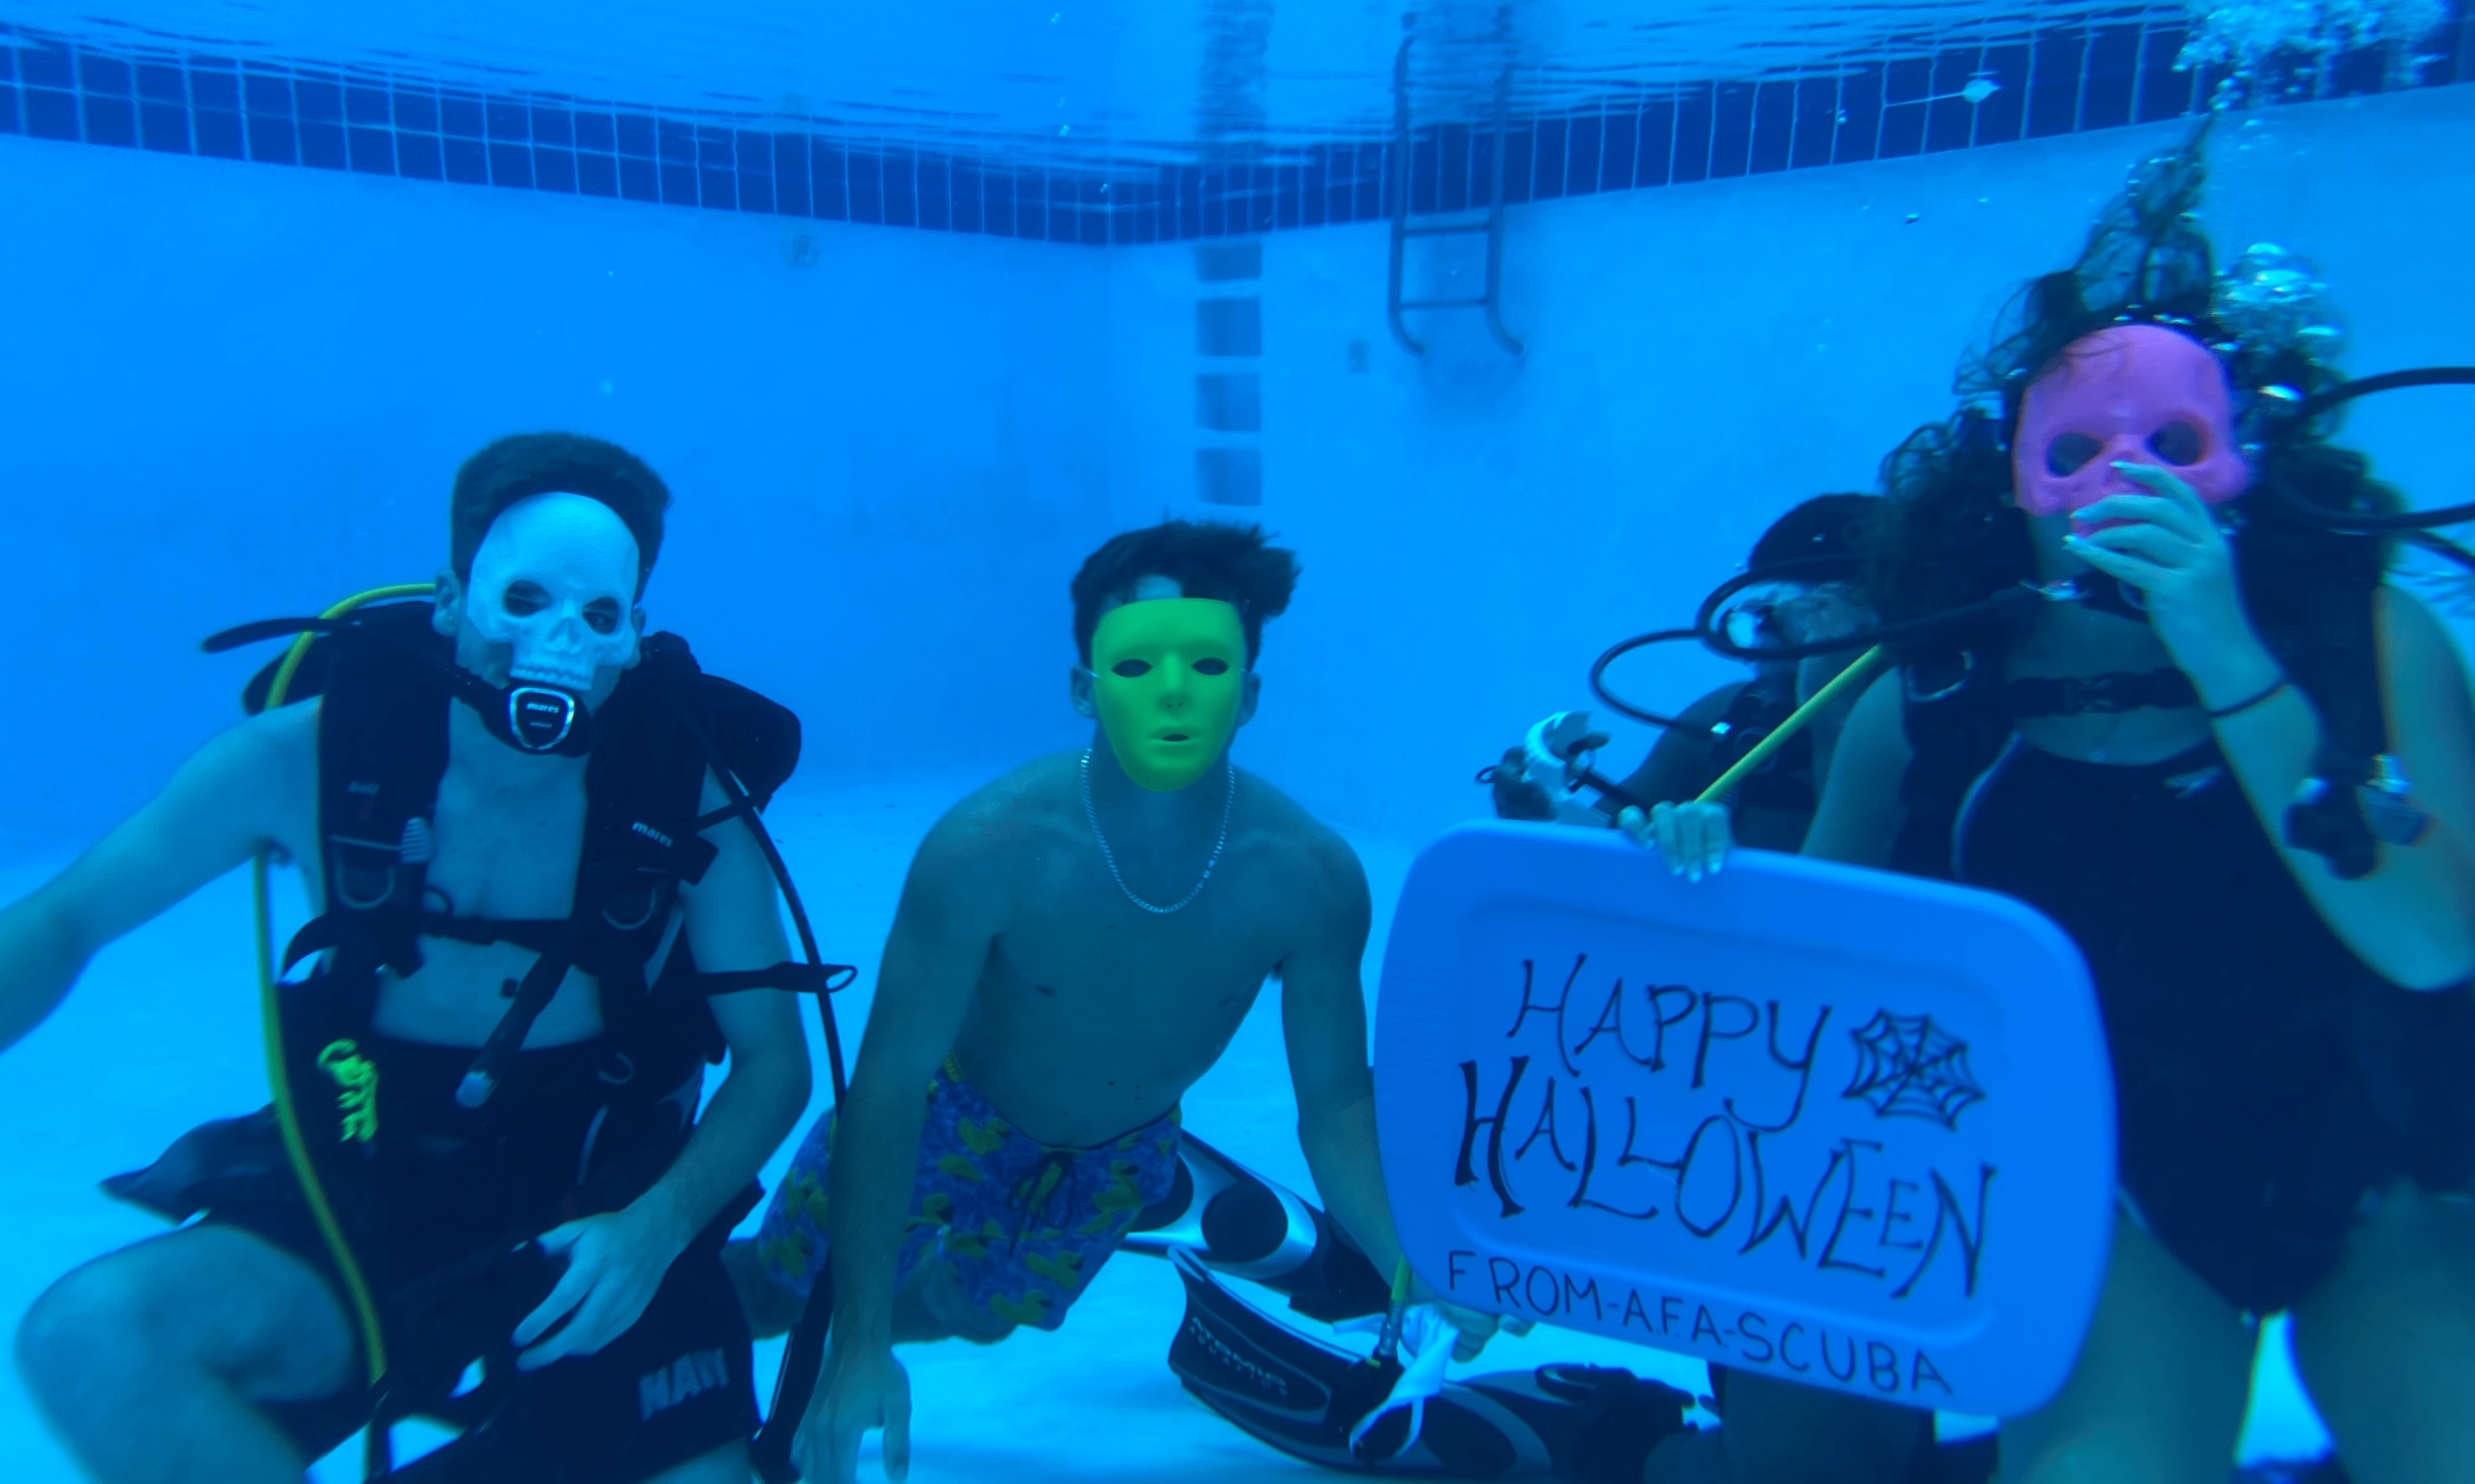 Mrs. Tonya Singleton’s Upper School students shared Happy Halloween messages with masks and skeletons while scuba diving in Farragut’s pool.